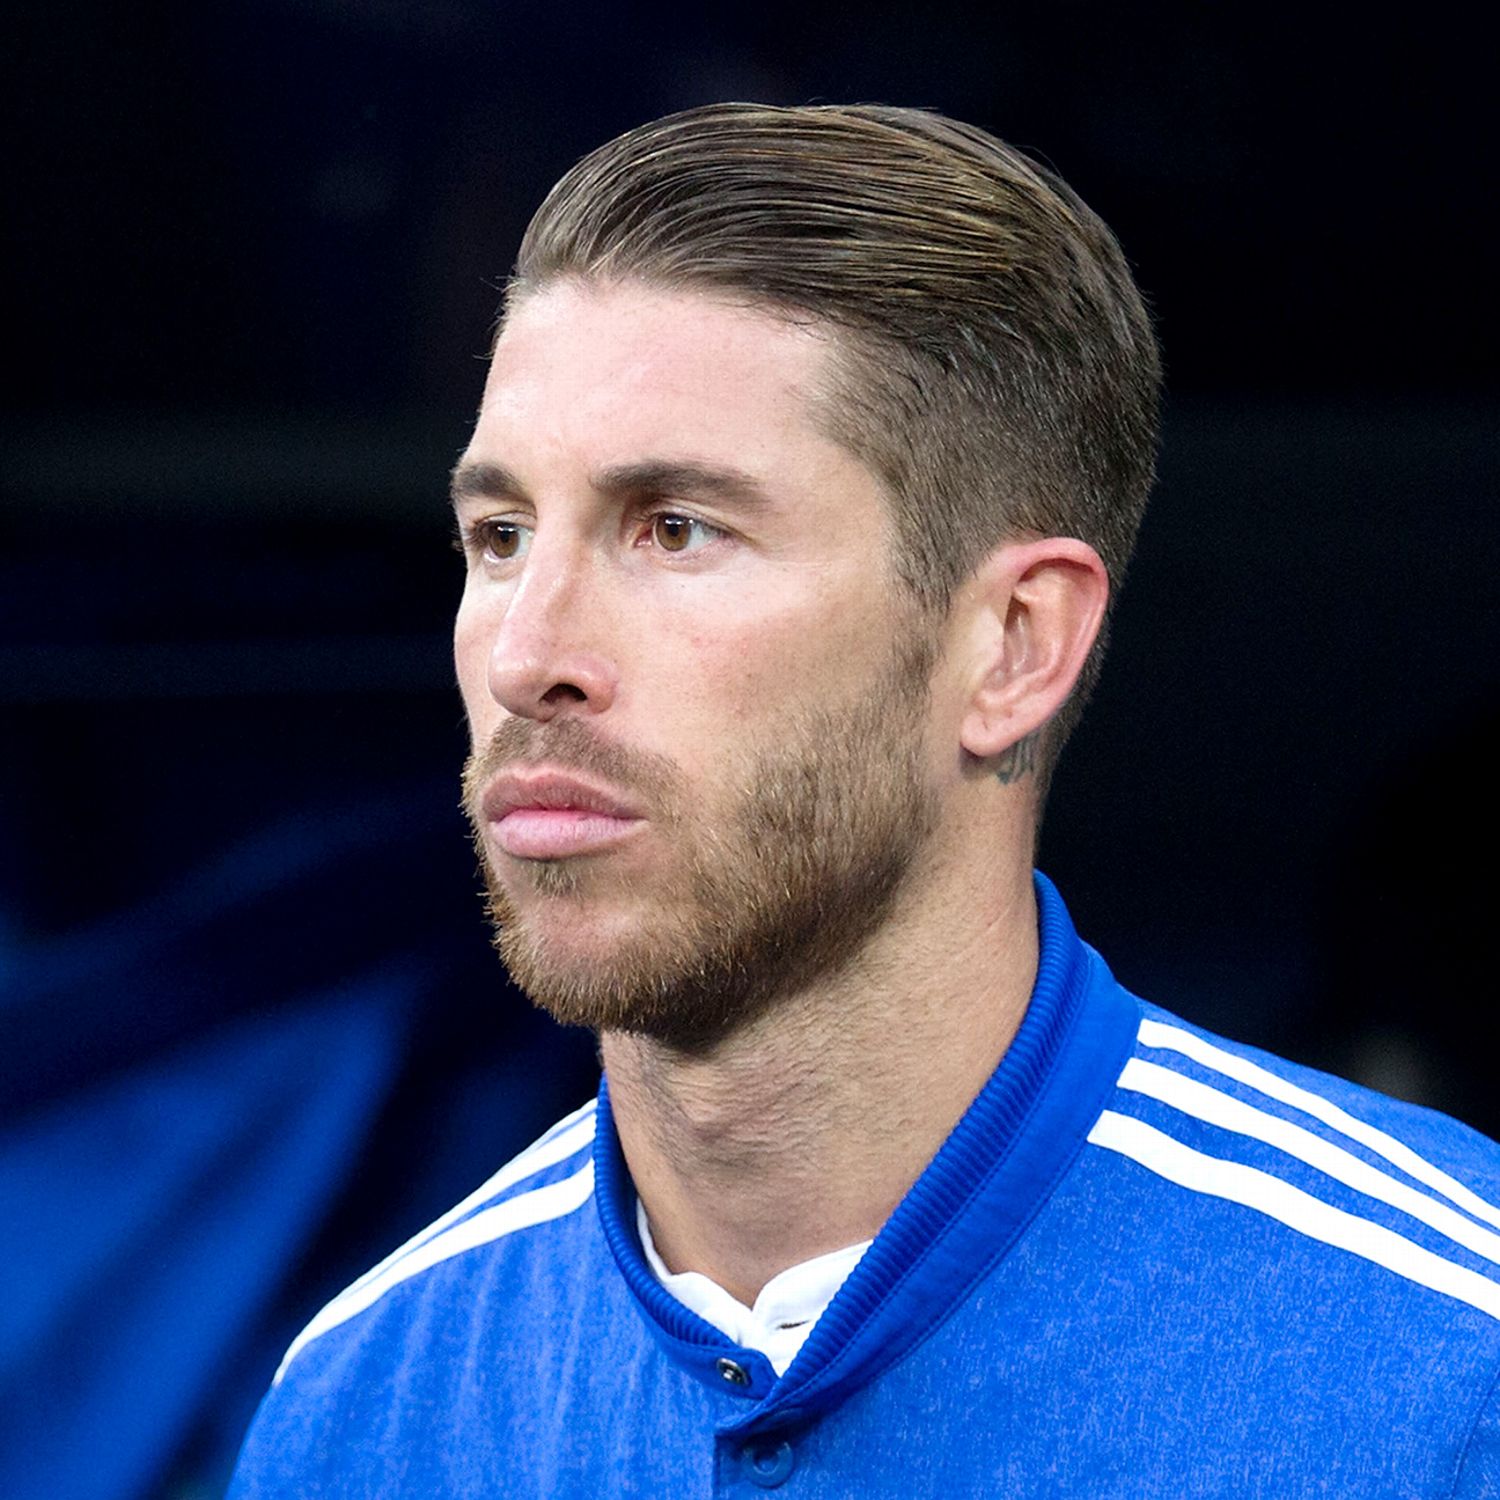 Real Madrid's Sergio Ramos sidelined by calf muscle injury - ESPN FC